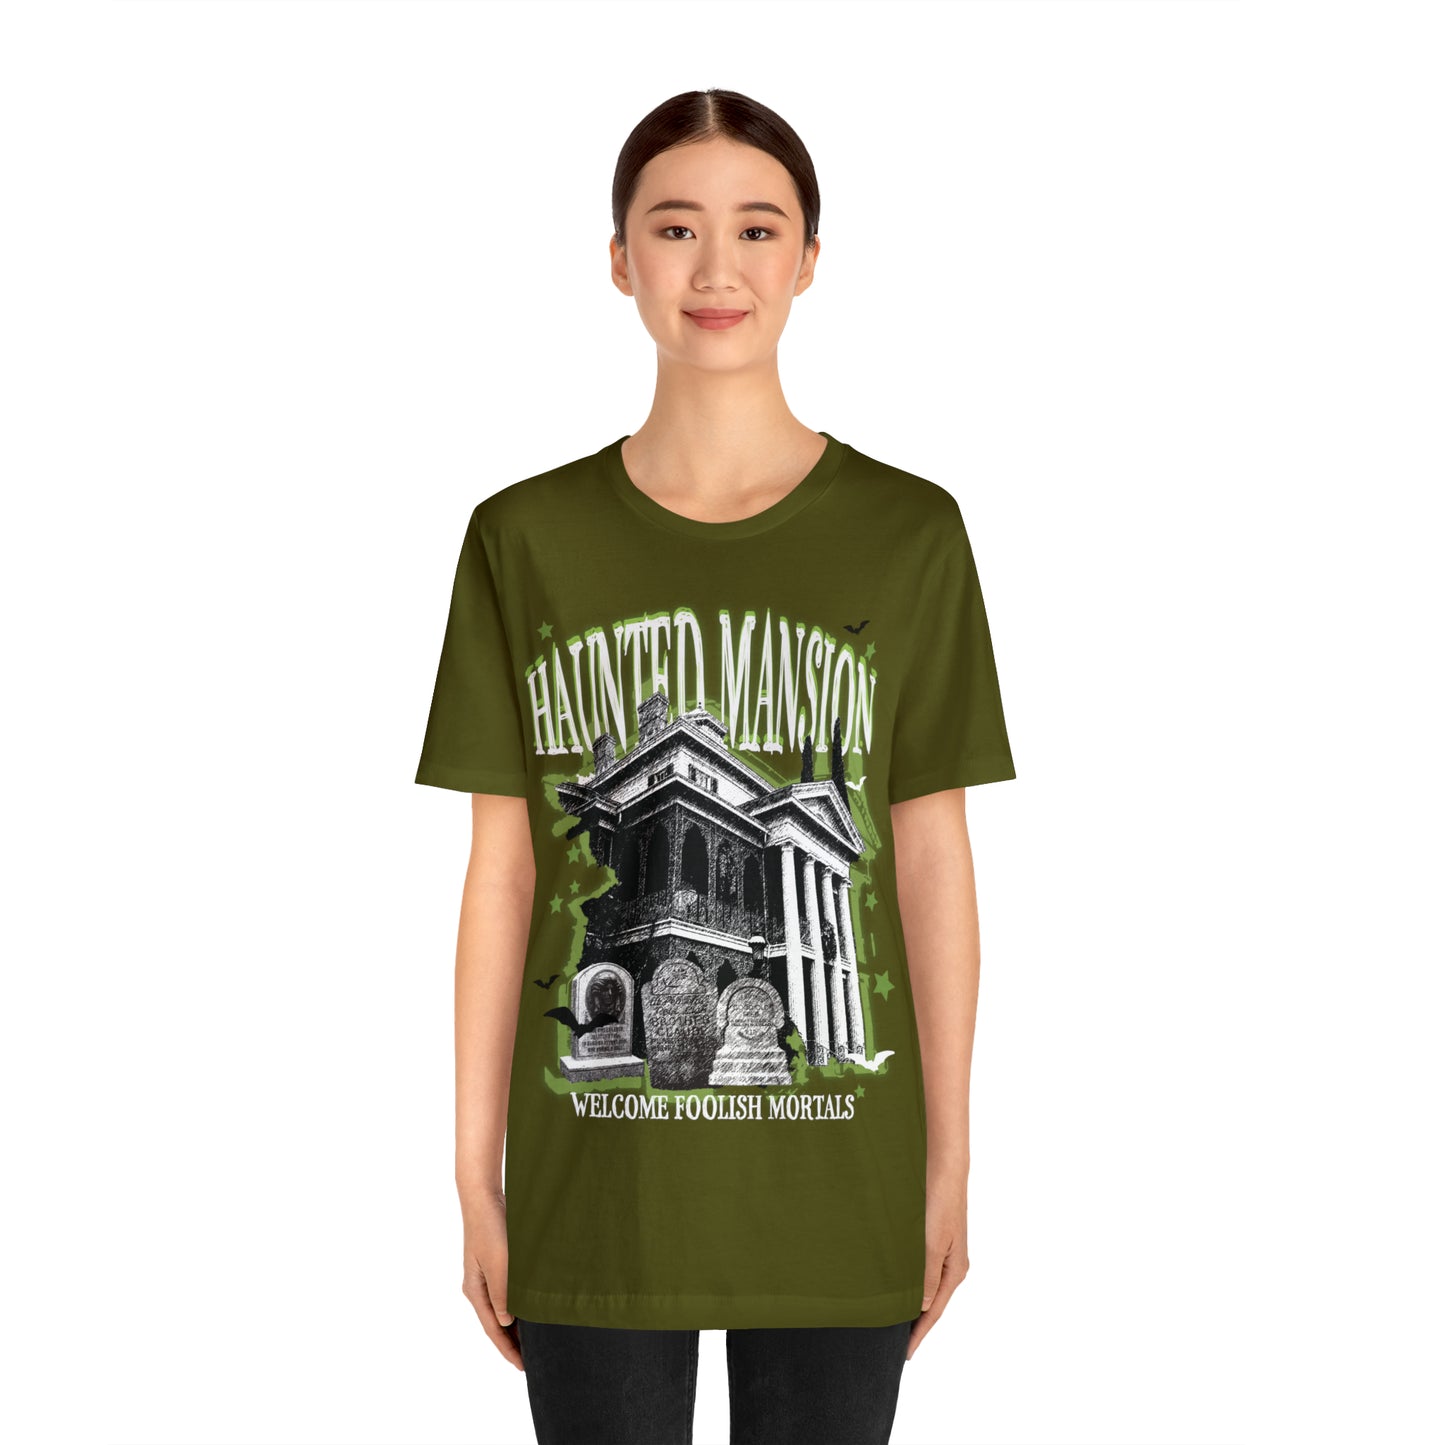 Haunted Mansion Graphic Tee